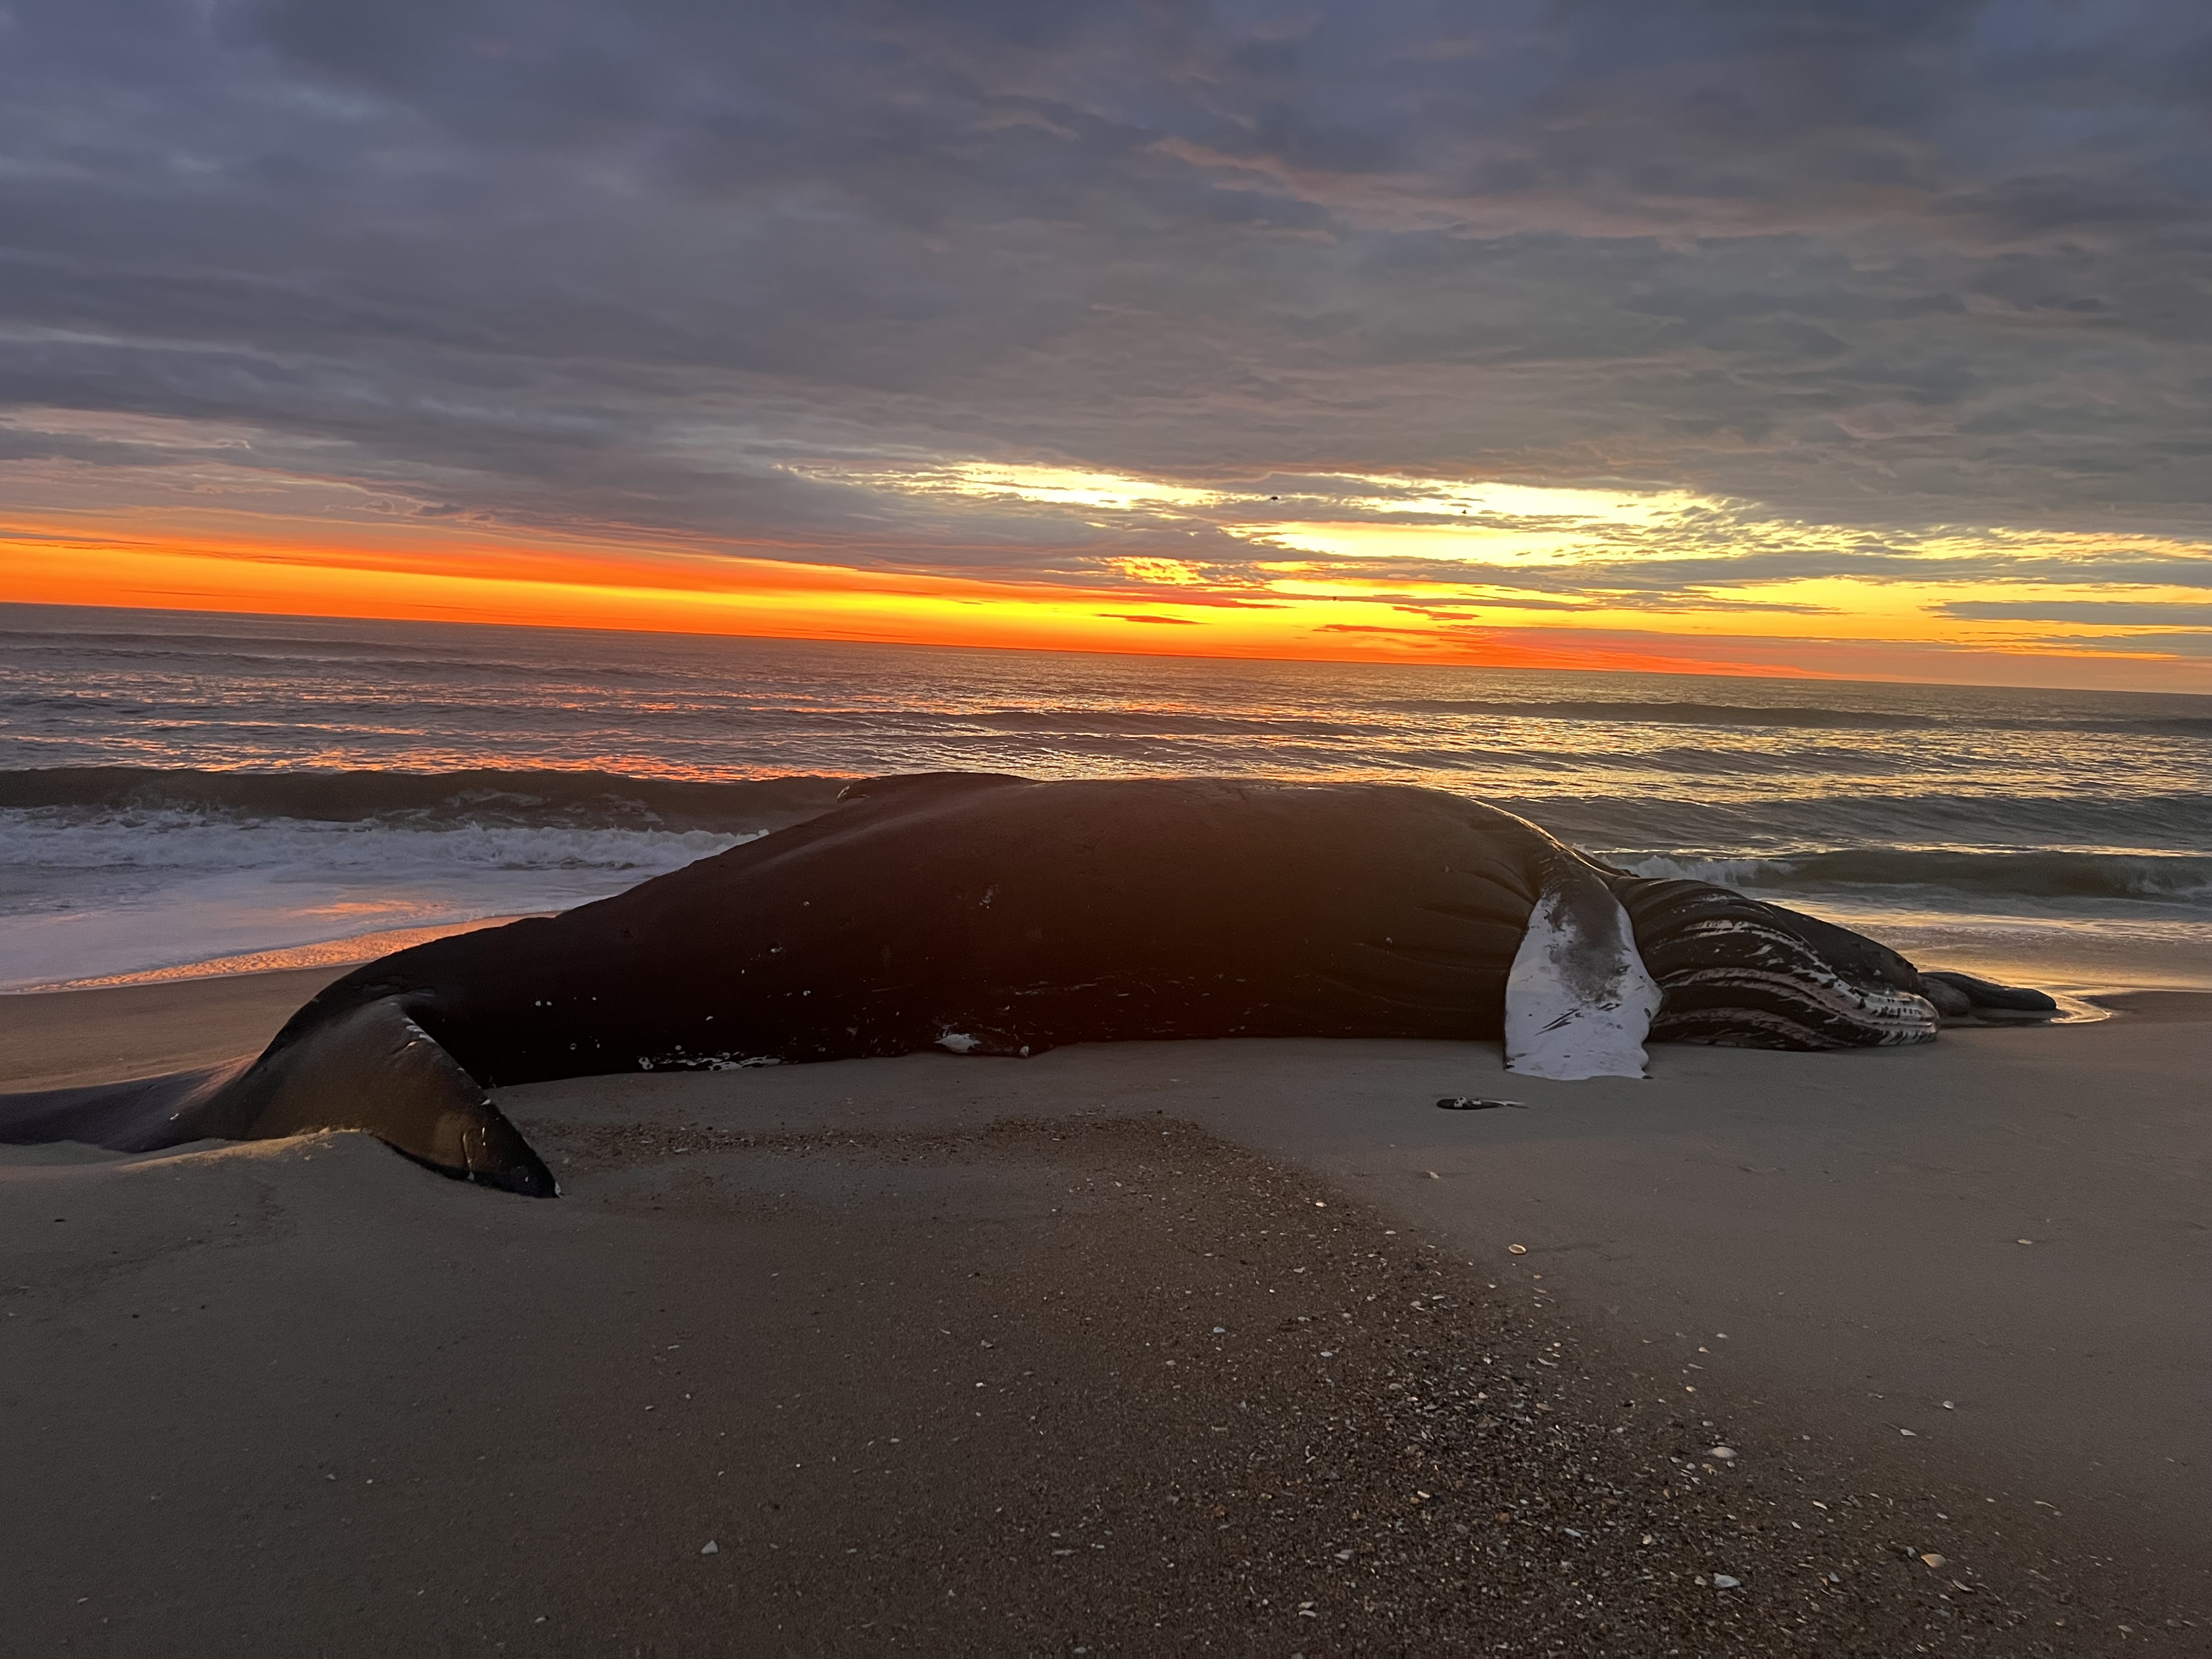 Dead Humpback whale washed up on the beach at Assateague Island National Seashore.